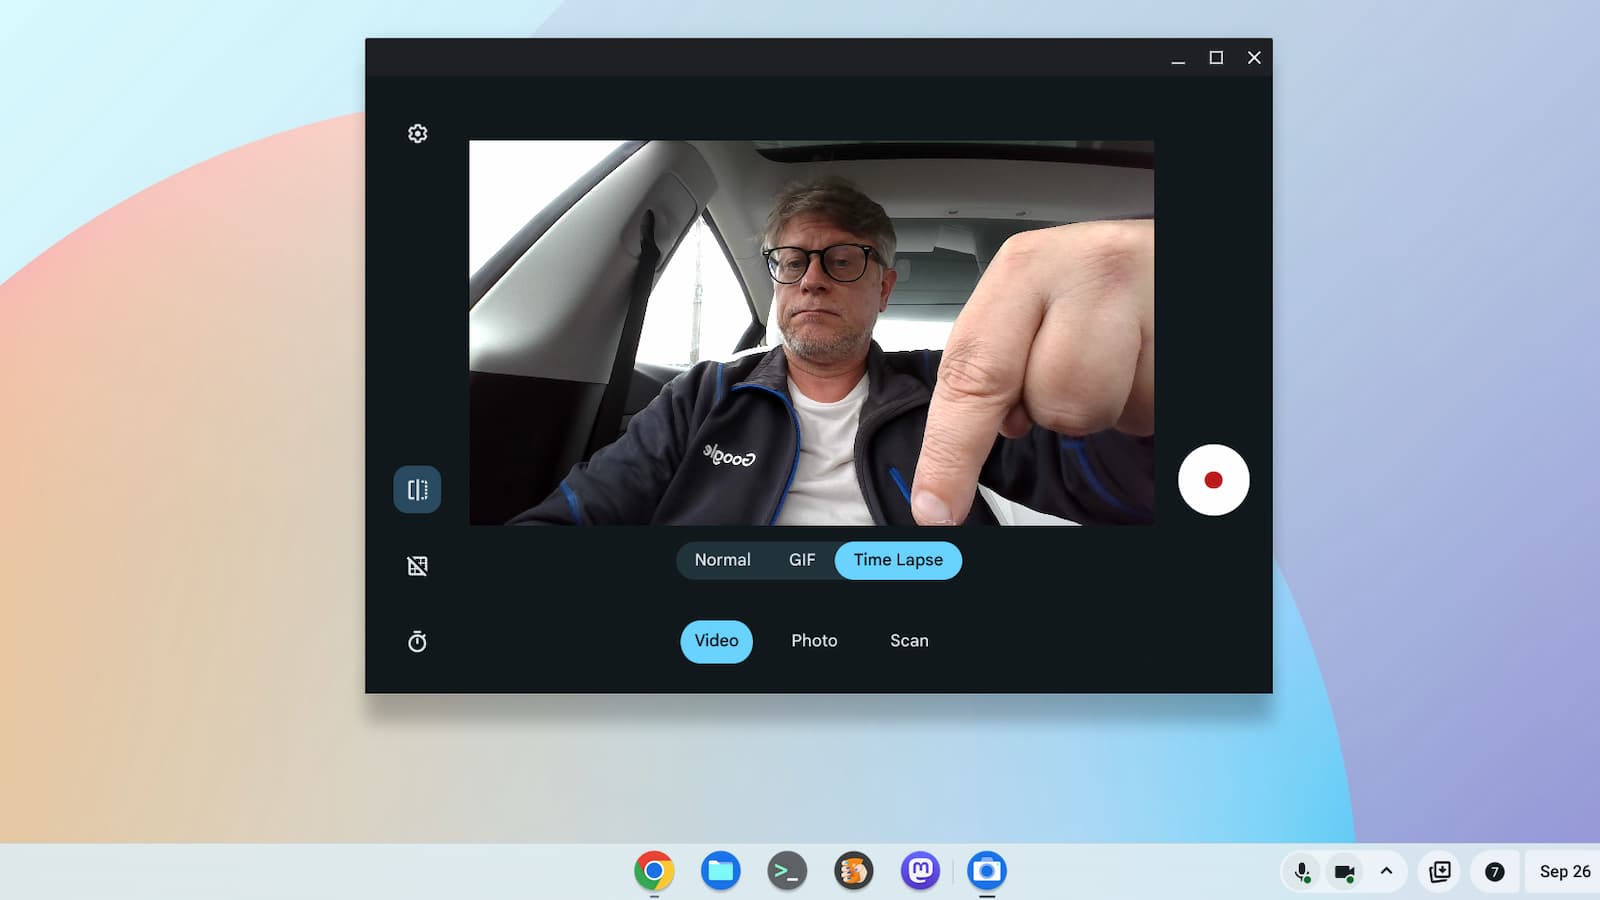 The ChromeOS 117 release adds new Chromebook features